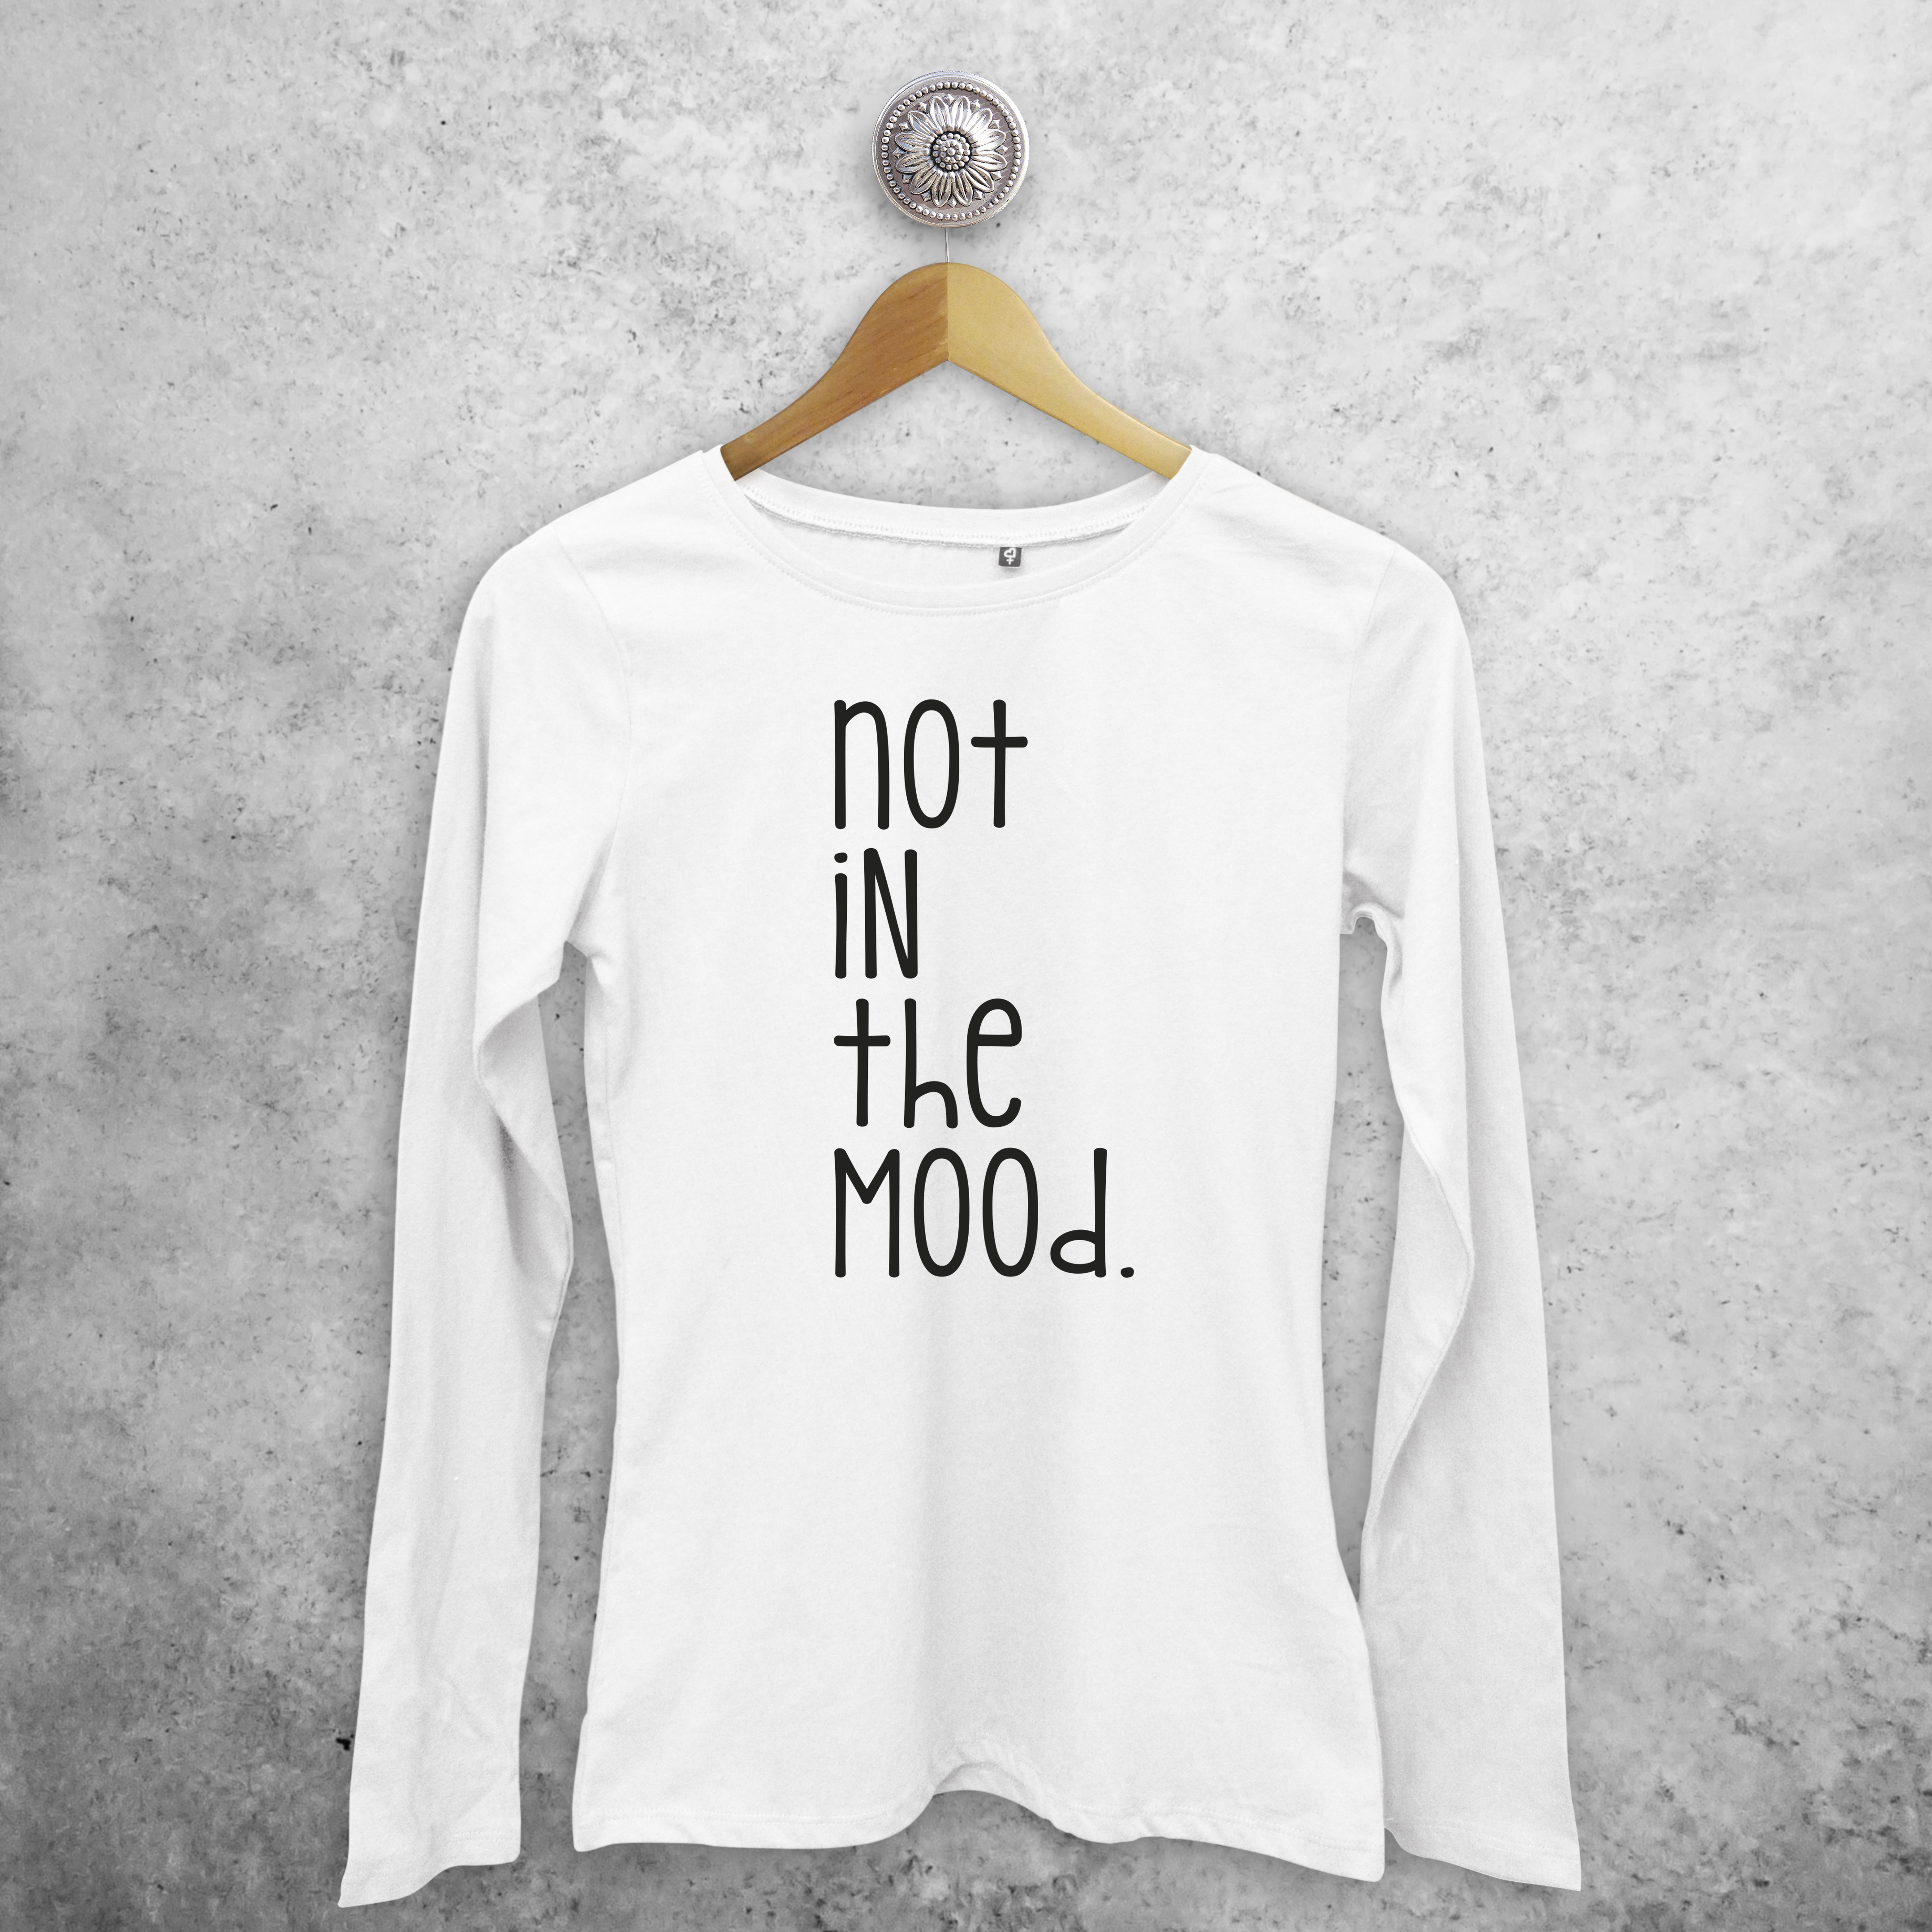 'Not in the mood.' adult longsleeve shirt